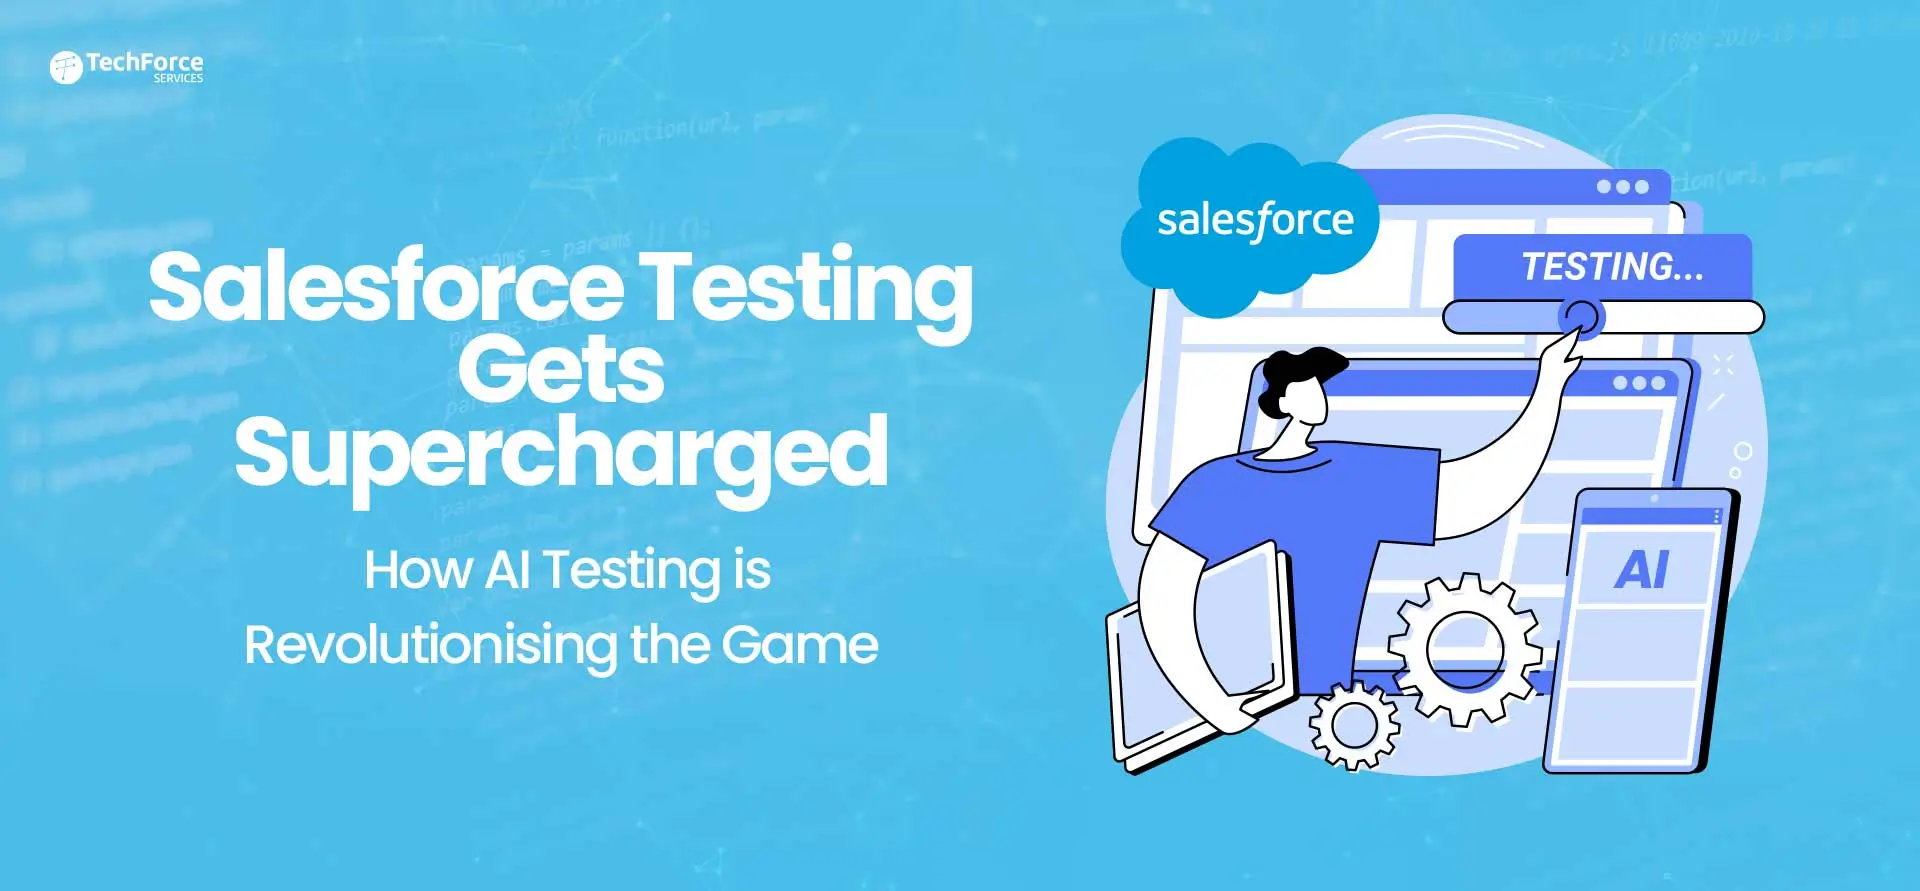 Salesforce testing gets supercharged with AI Testing